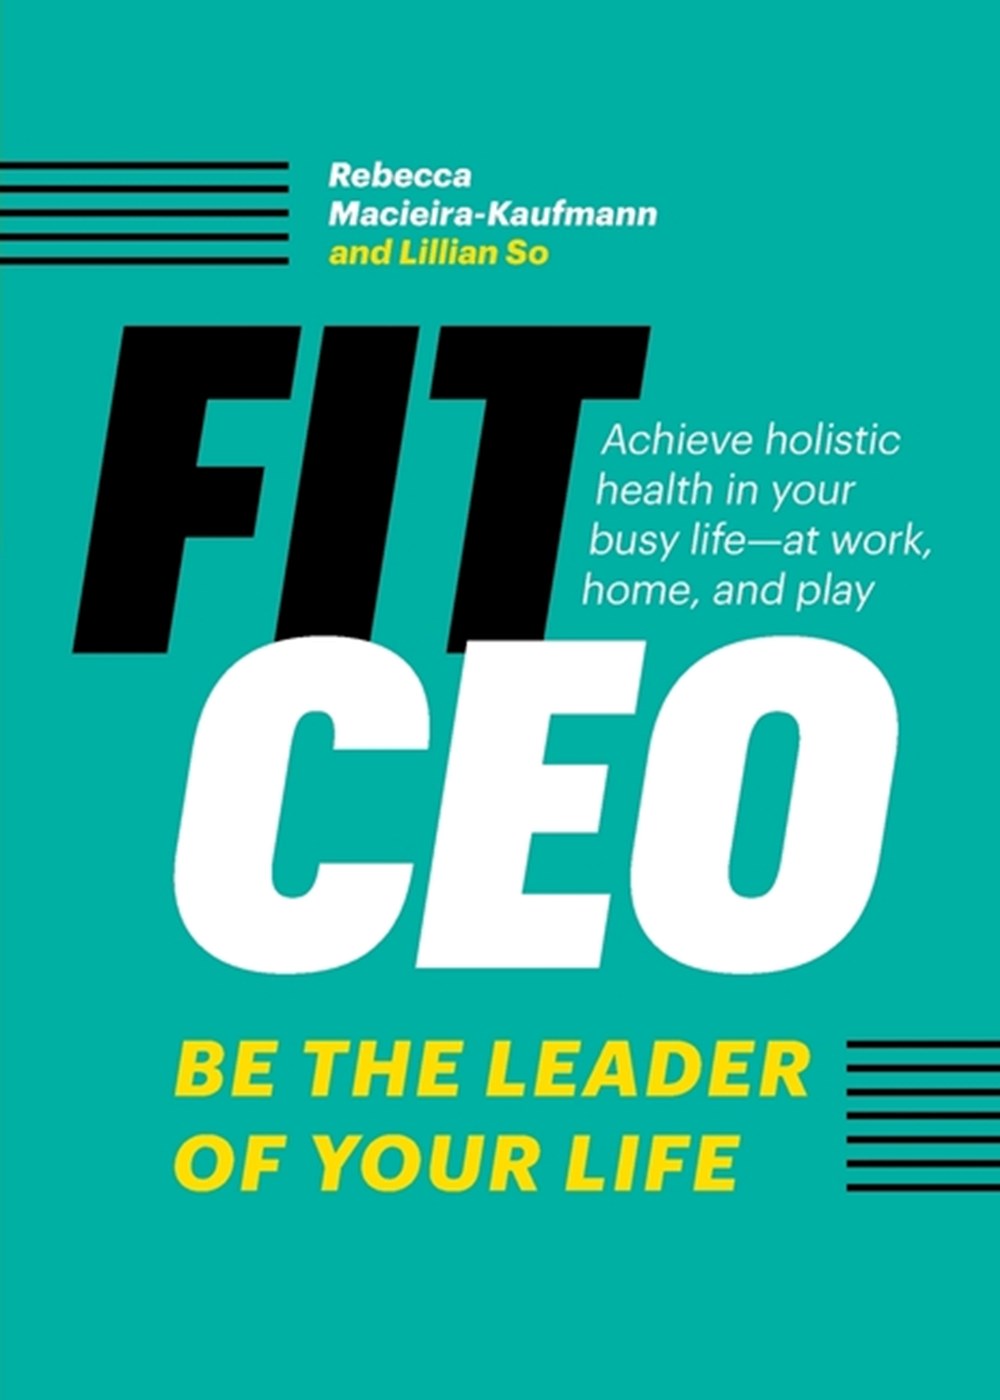 FitCEO Be the Leader of Your Life